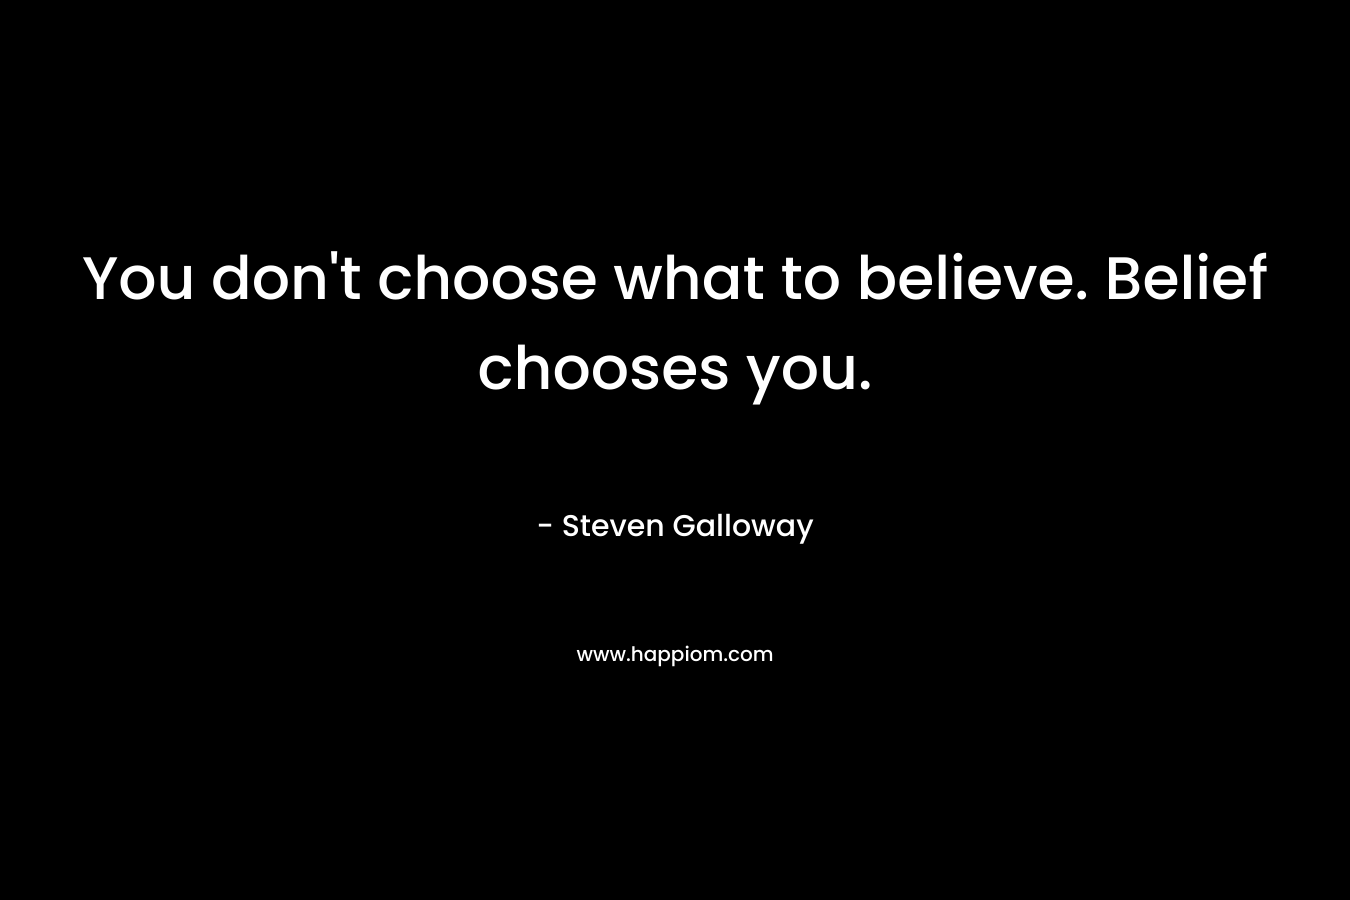 You don’t choose what to believe. Belief chooses you. – Steven Galloway